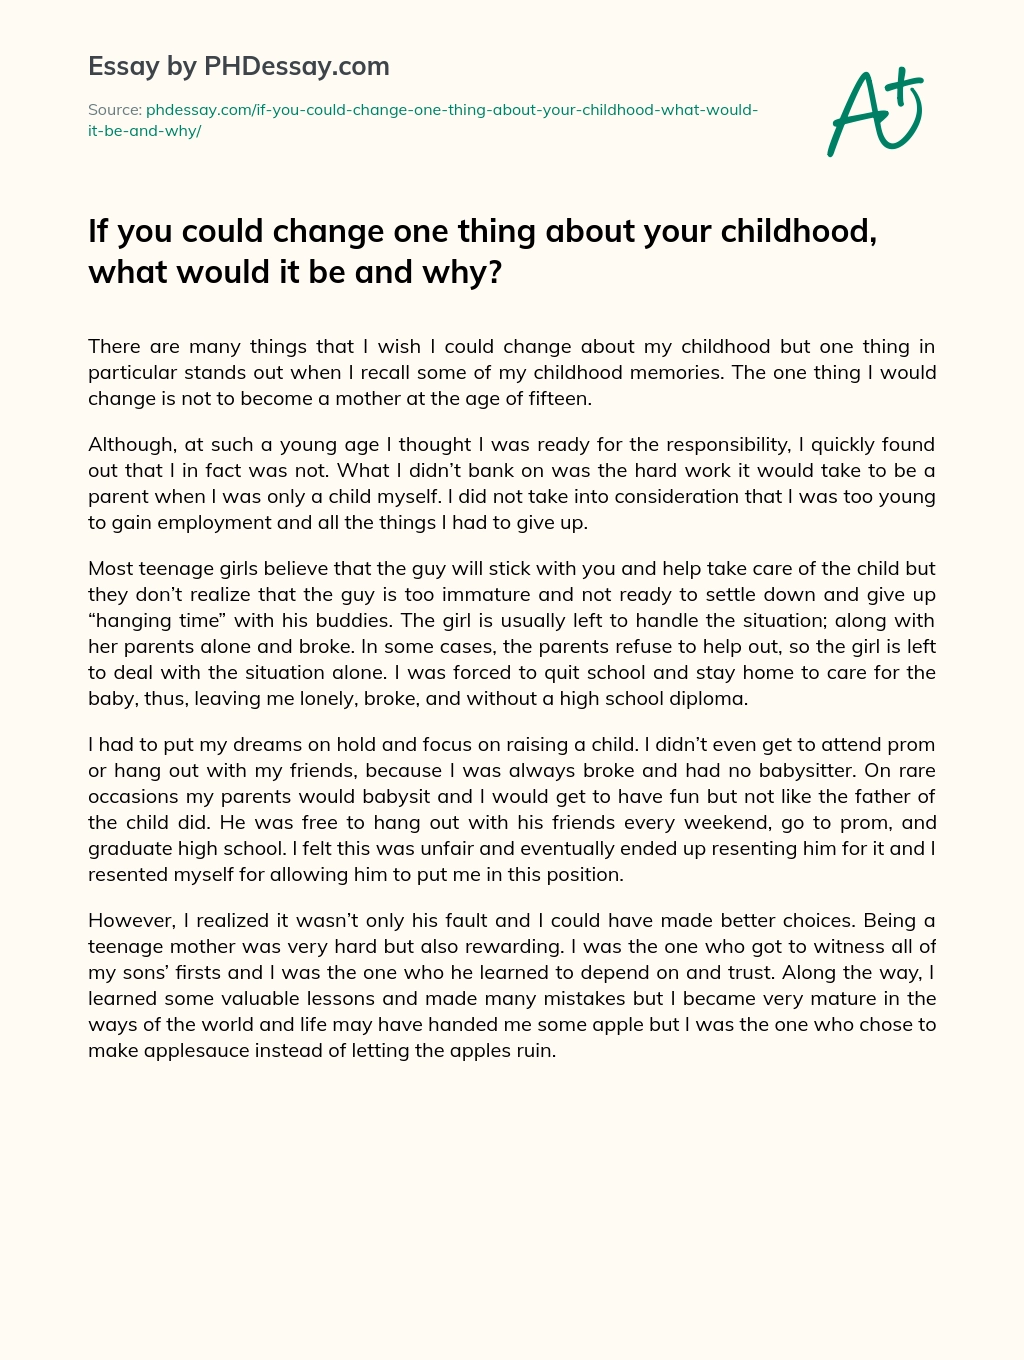 If you could change one thing about your childhood, what would it be and why? essay